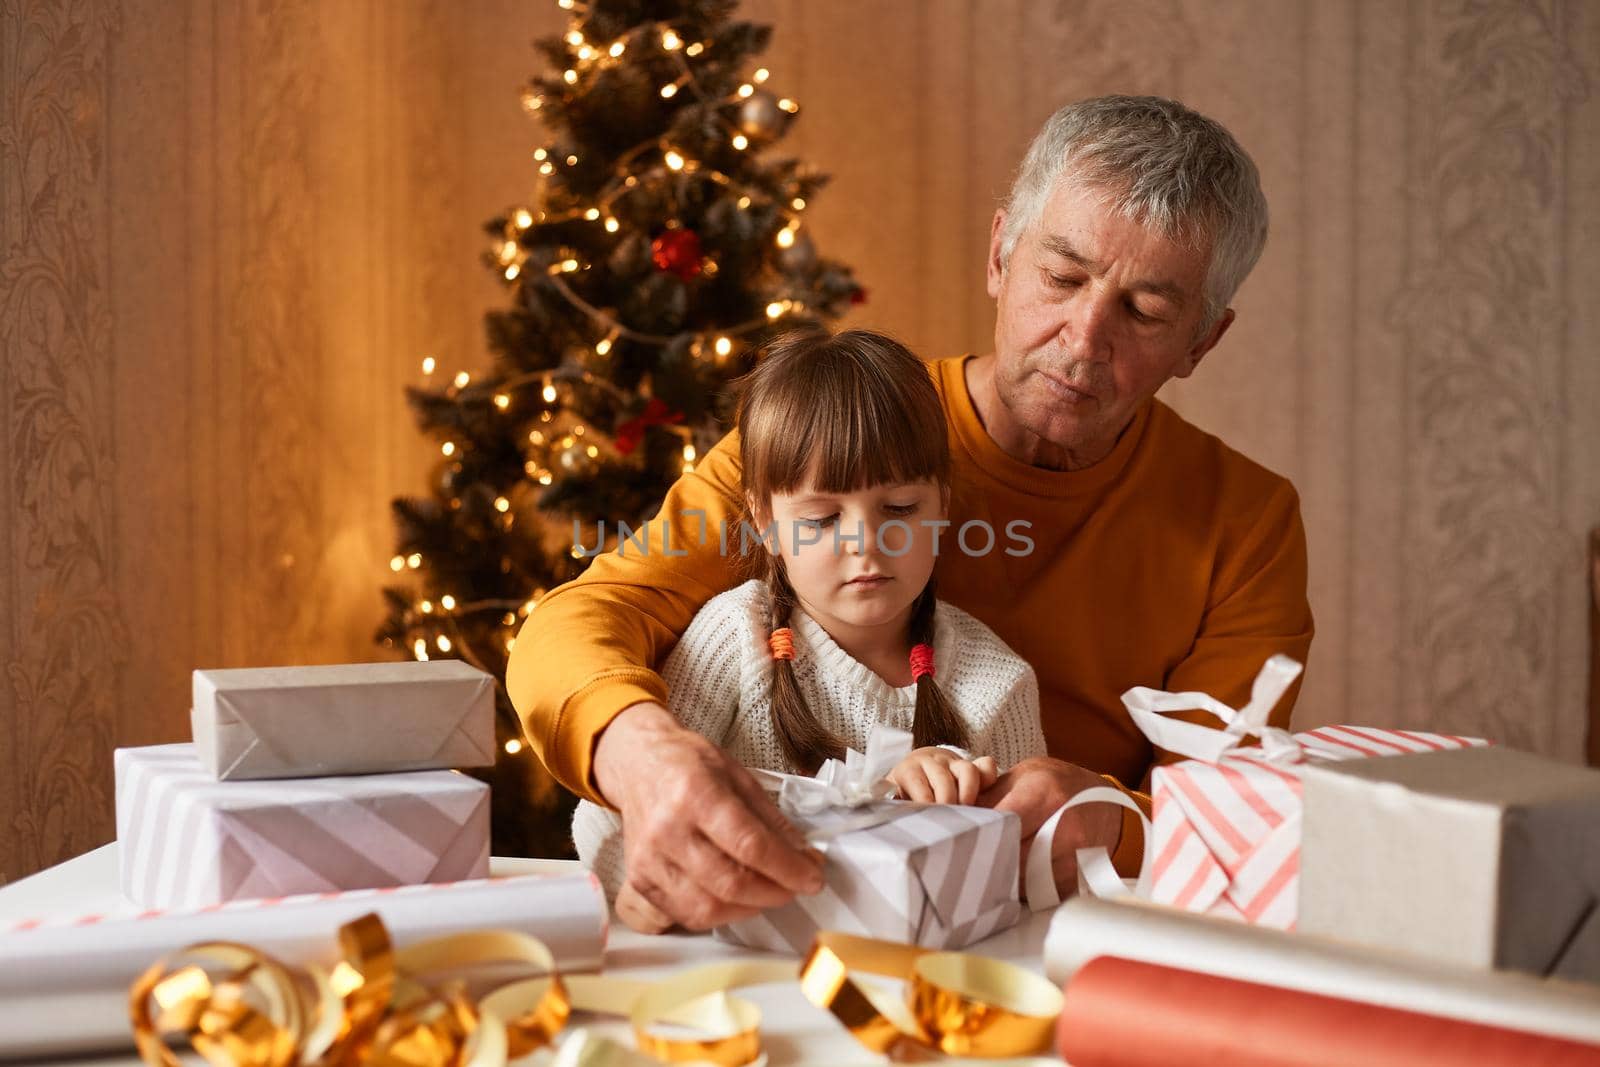 Indoor shot of senior man wearing orange sweater with his granddaughter on knees packing present boxes for Christmas holidays while sitting at table together.